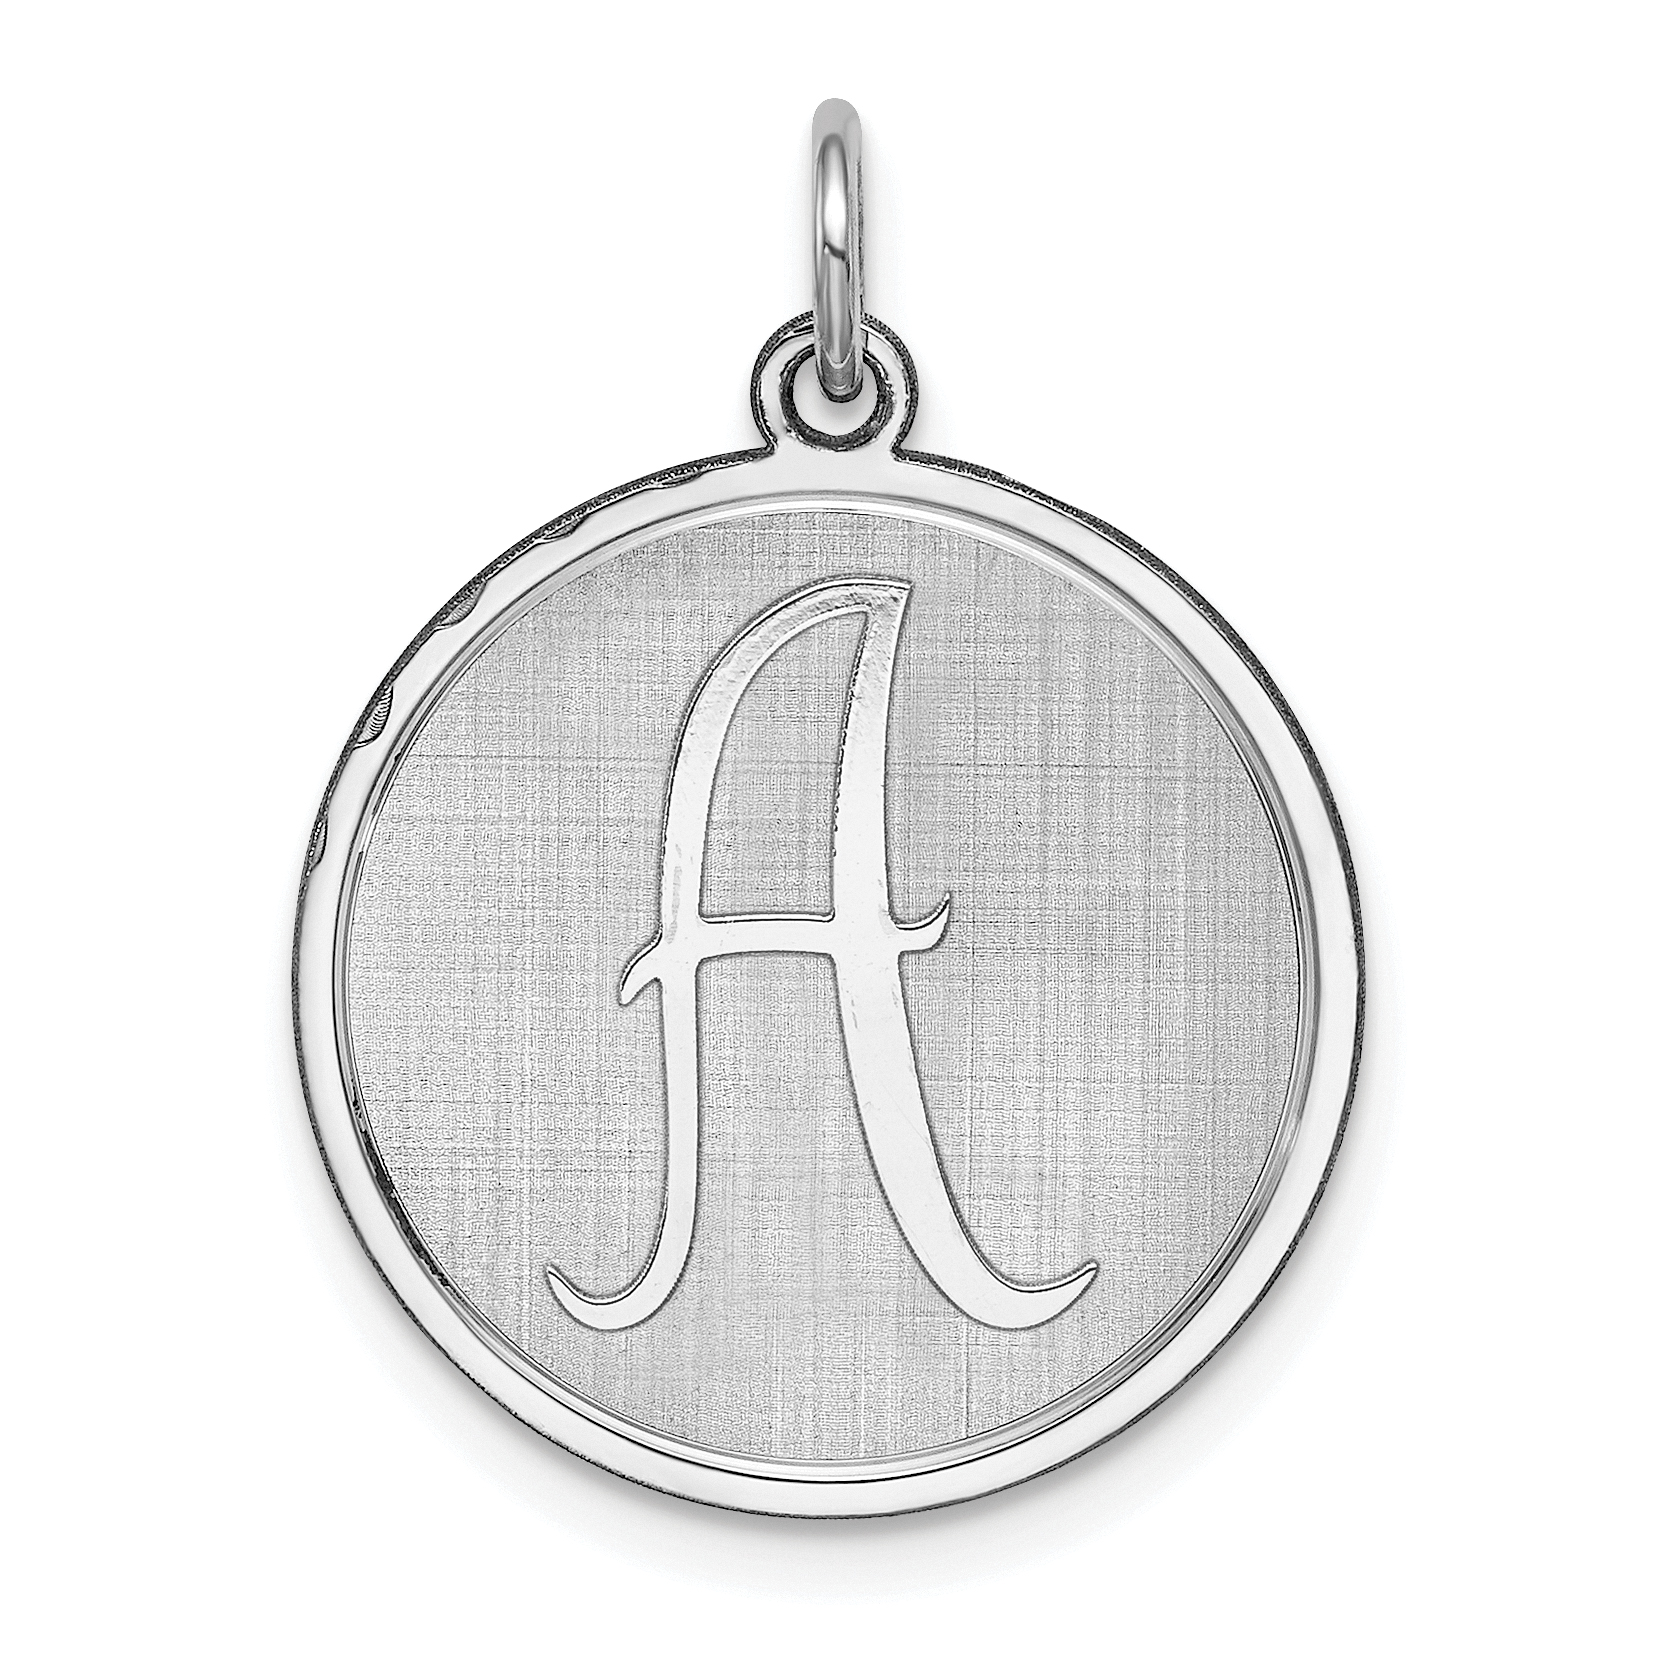 Letter A Pendant Medal Initial Charm Brocaded Lower Case Sterling Silver